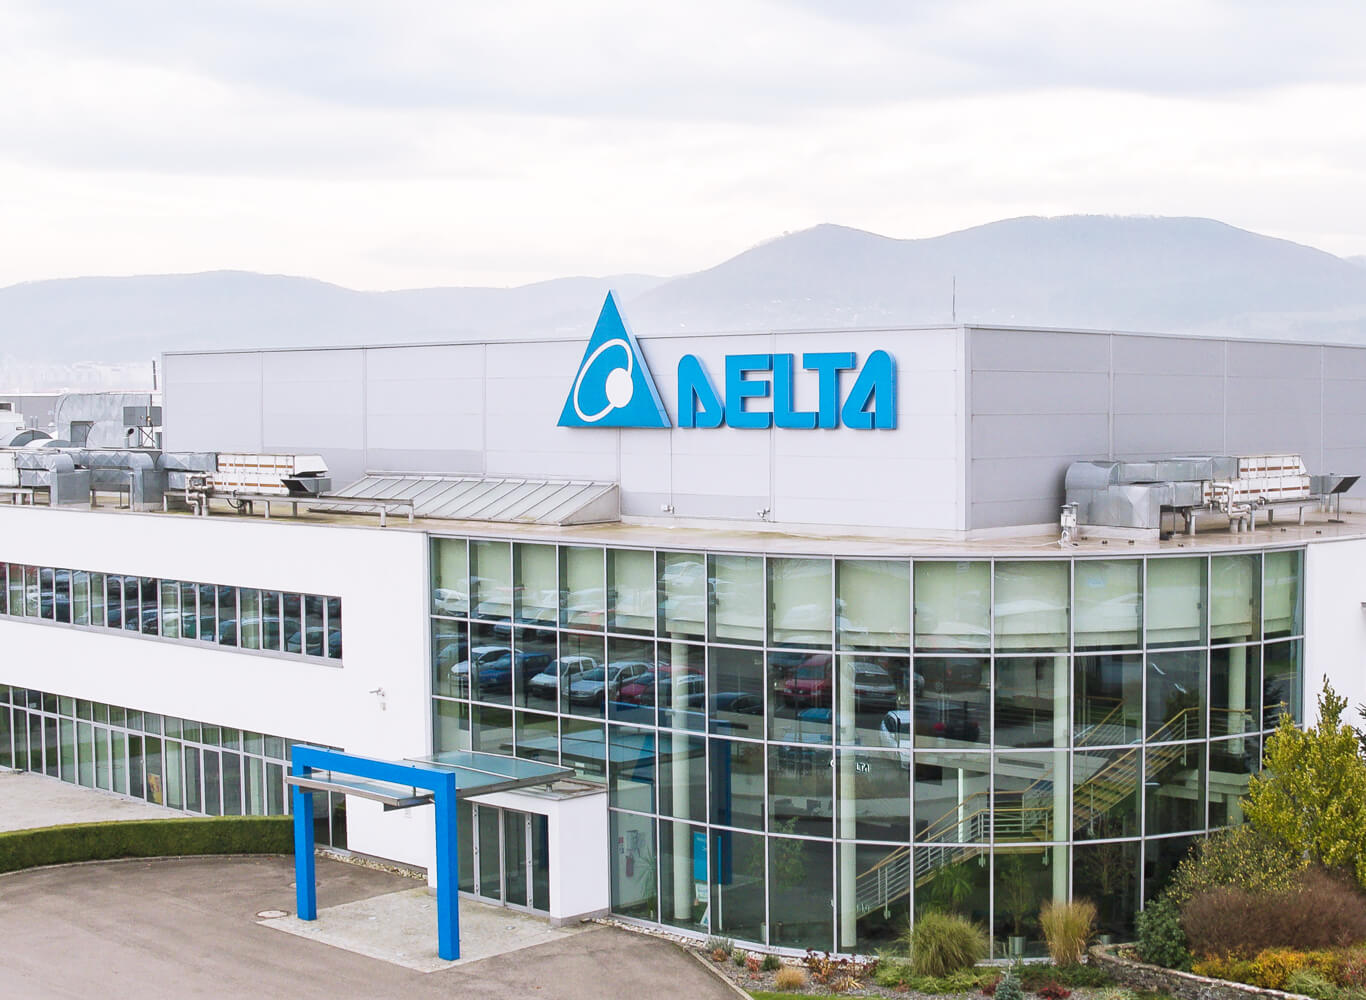 The Slovakia Medical facility is in the heart of Europe that is an important service site for DELBio in Europe. The Slovakia factory is based in Trencin where offers both manufacturing and fast after-sales services, as well as kitting assembly, label tracking and packaging.